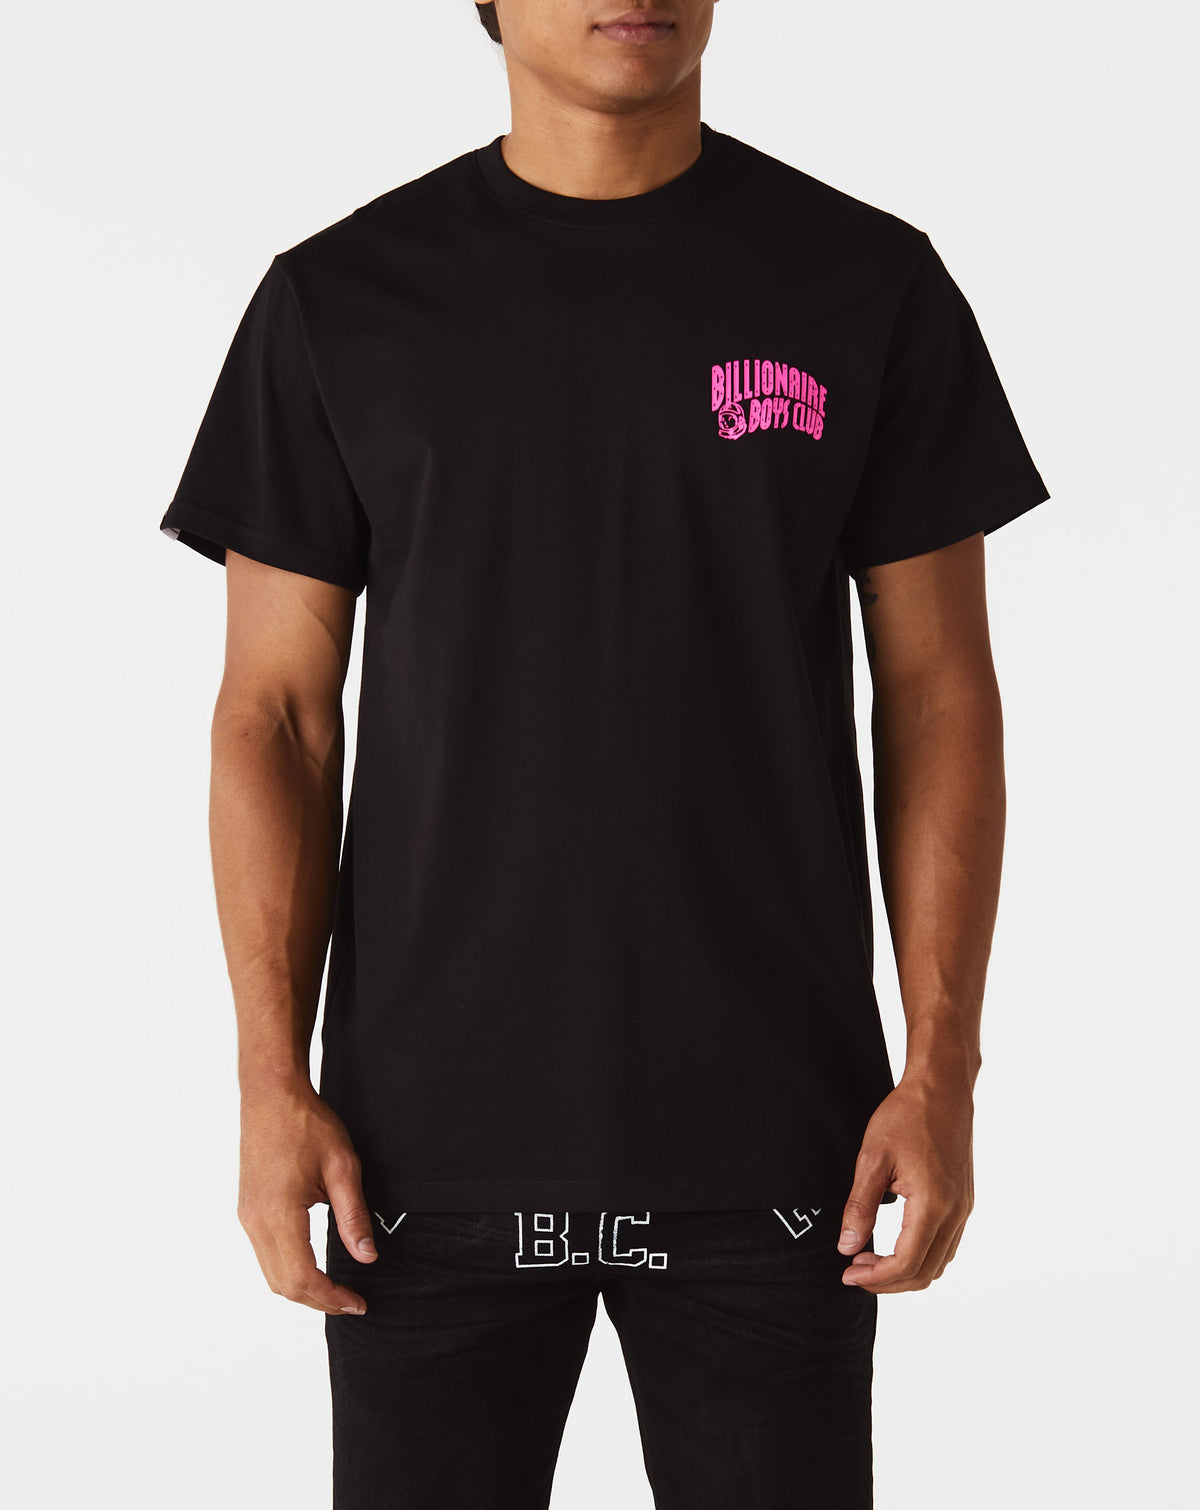 Billionaire Boys Club Clothing at Rule of Next